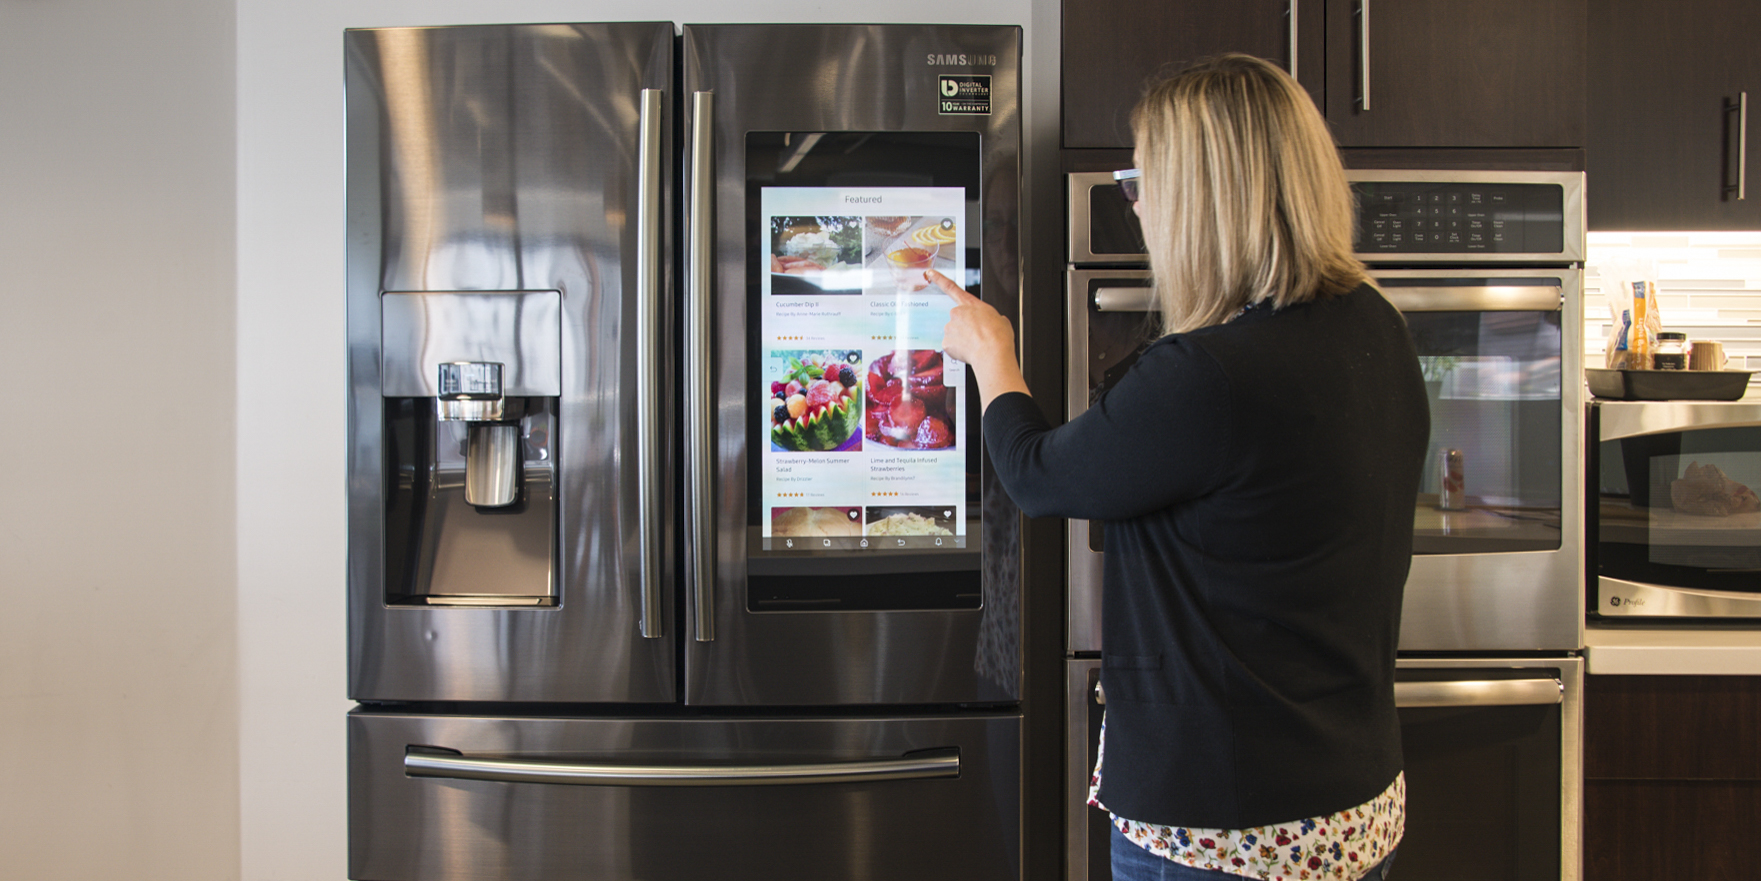 Samsung Family Hub Refrigerator Review: Brains With A Cool Factor